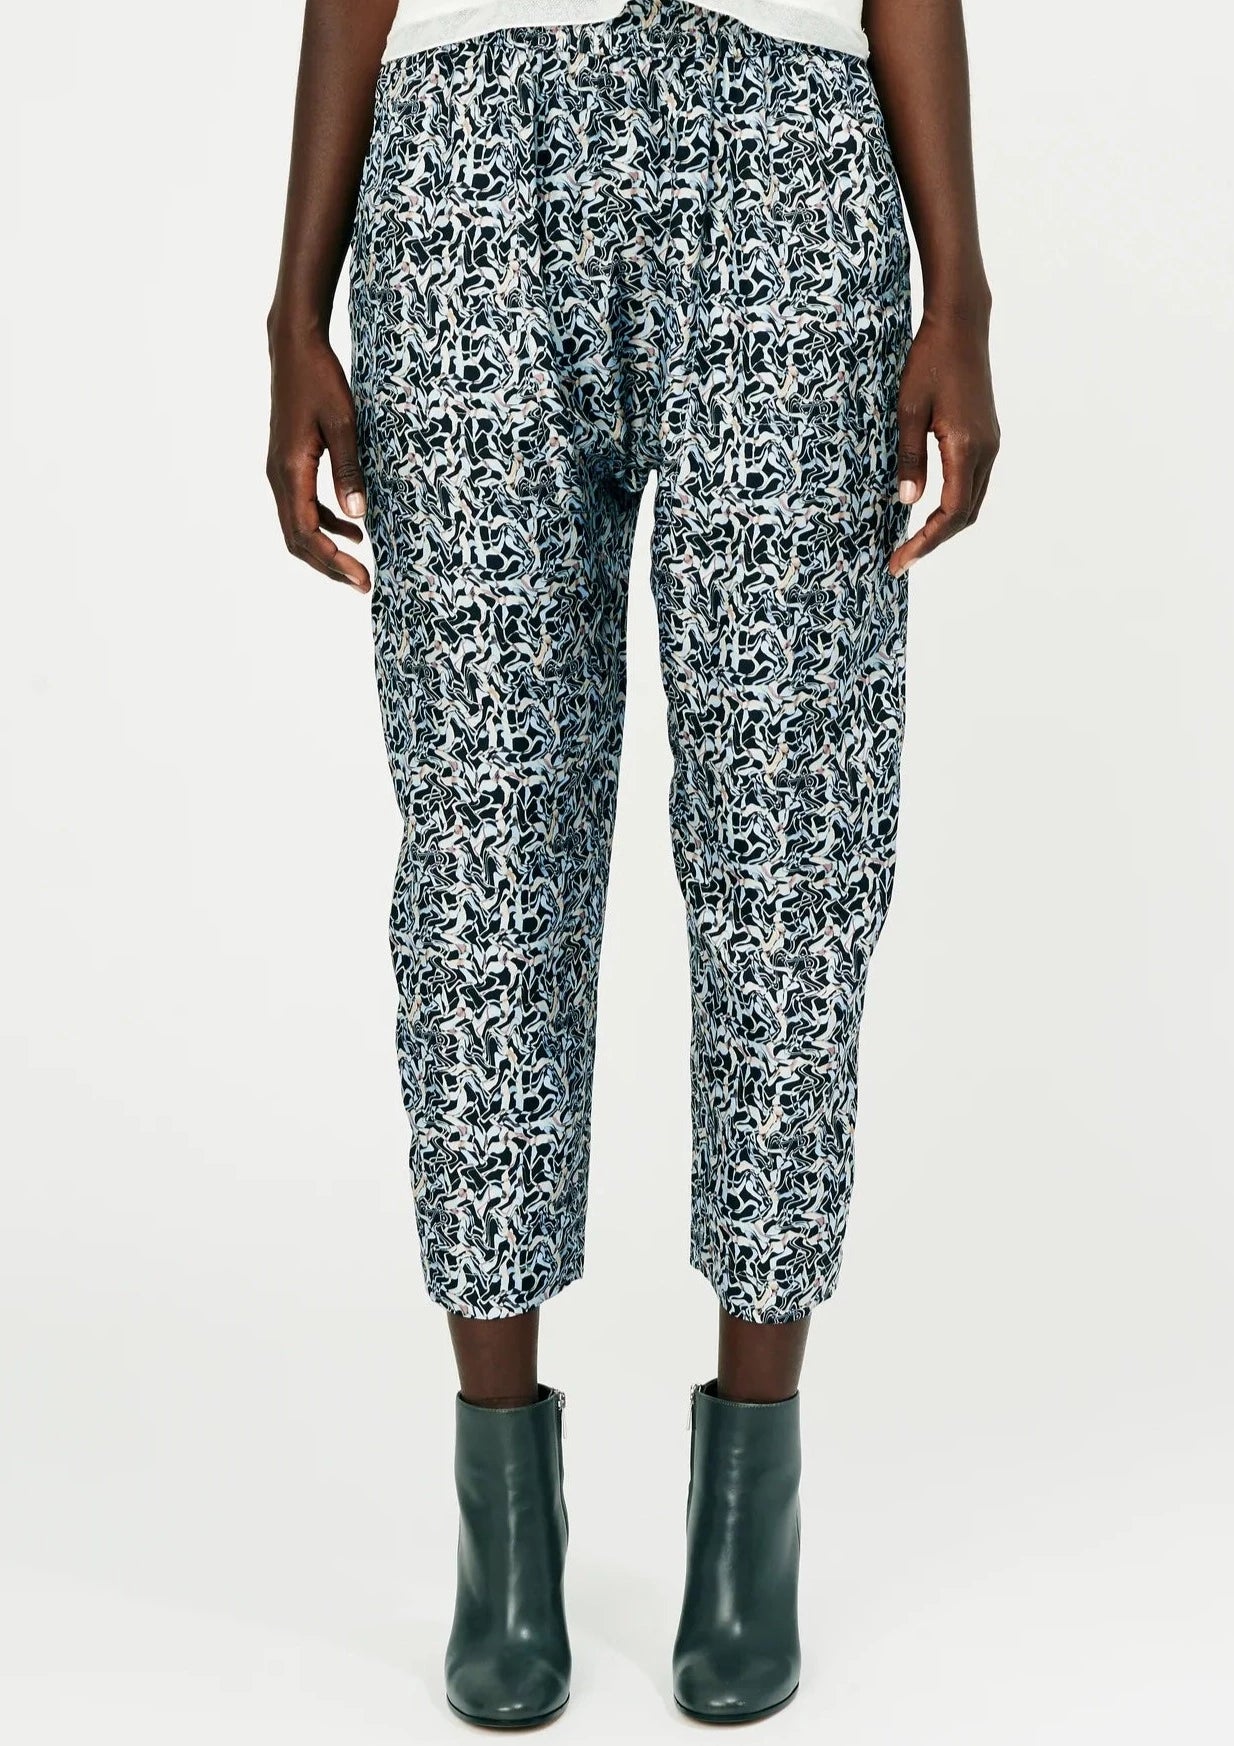 These printed pants are loose fitting pant that are great for a night in Malibu.  100% silk.  Runs true to size.